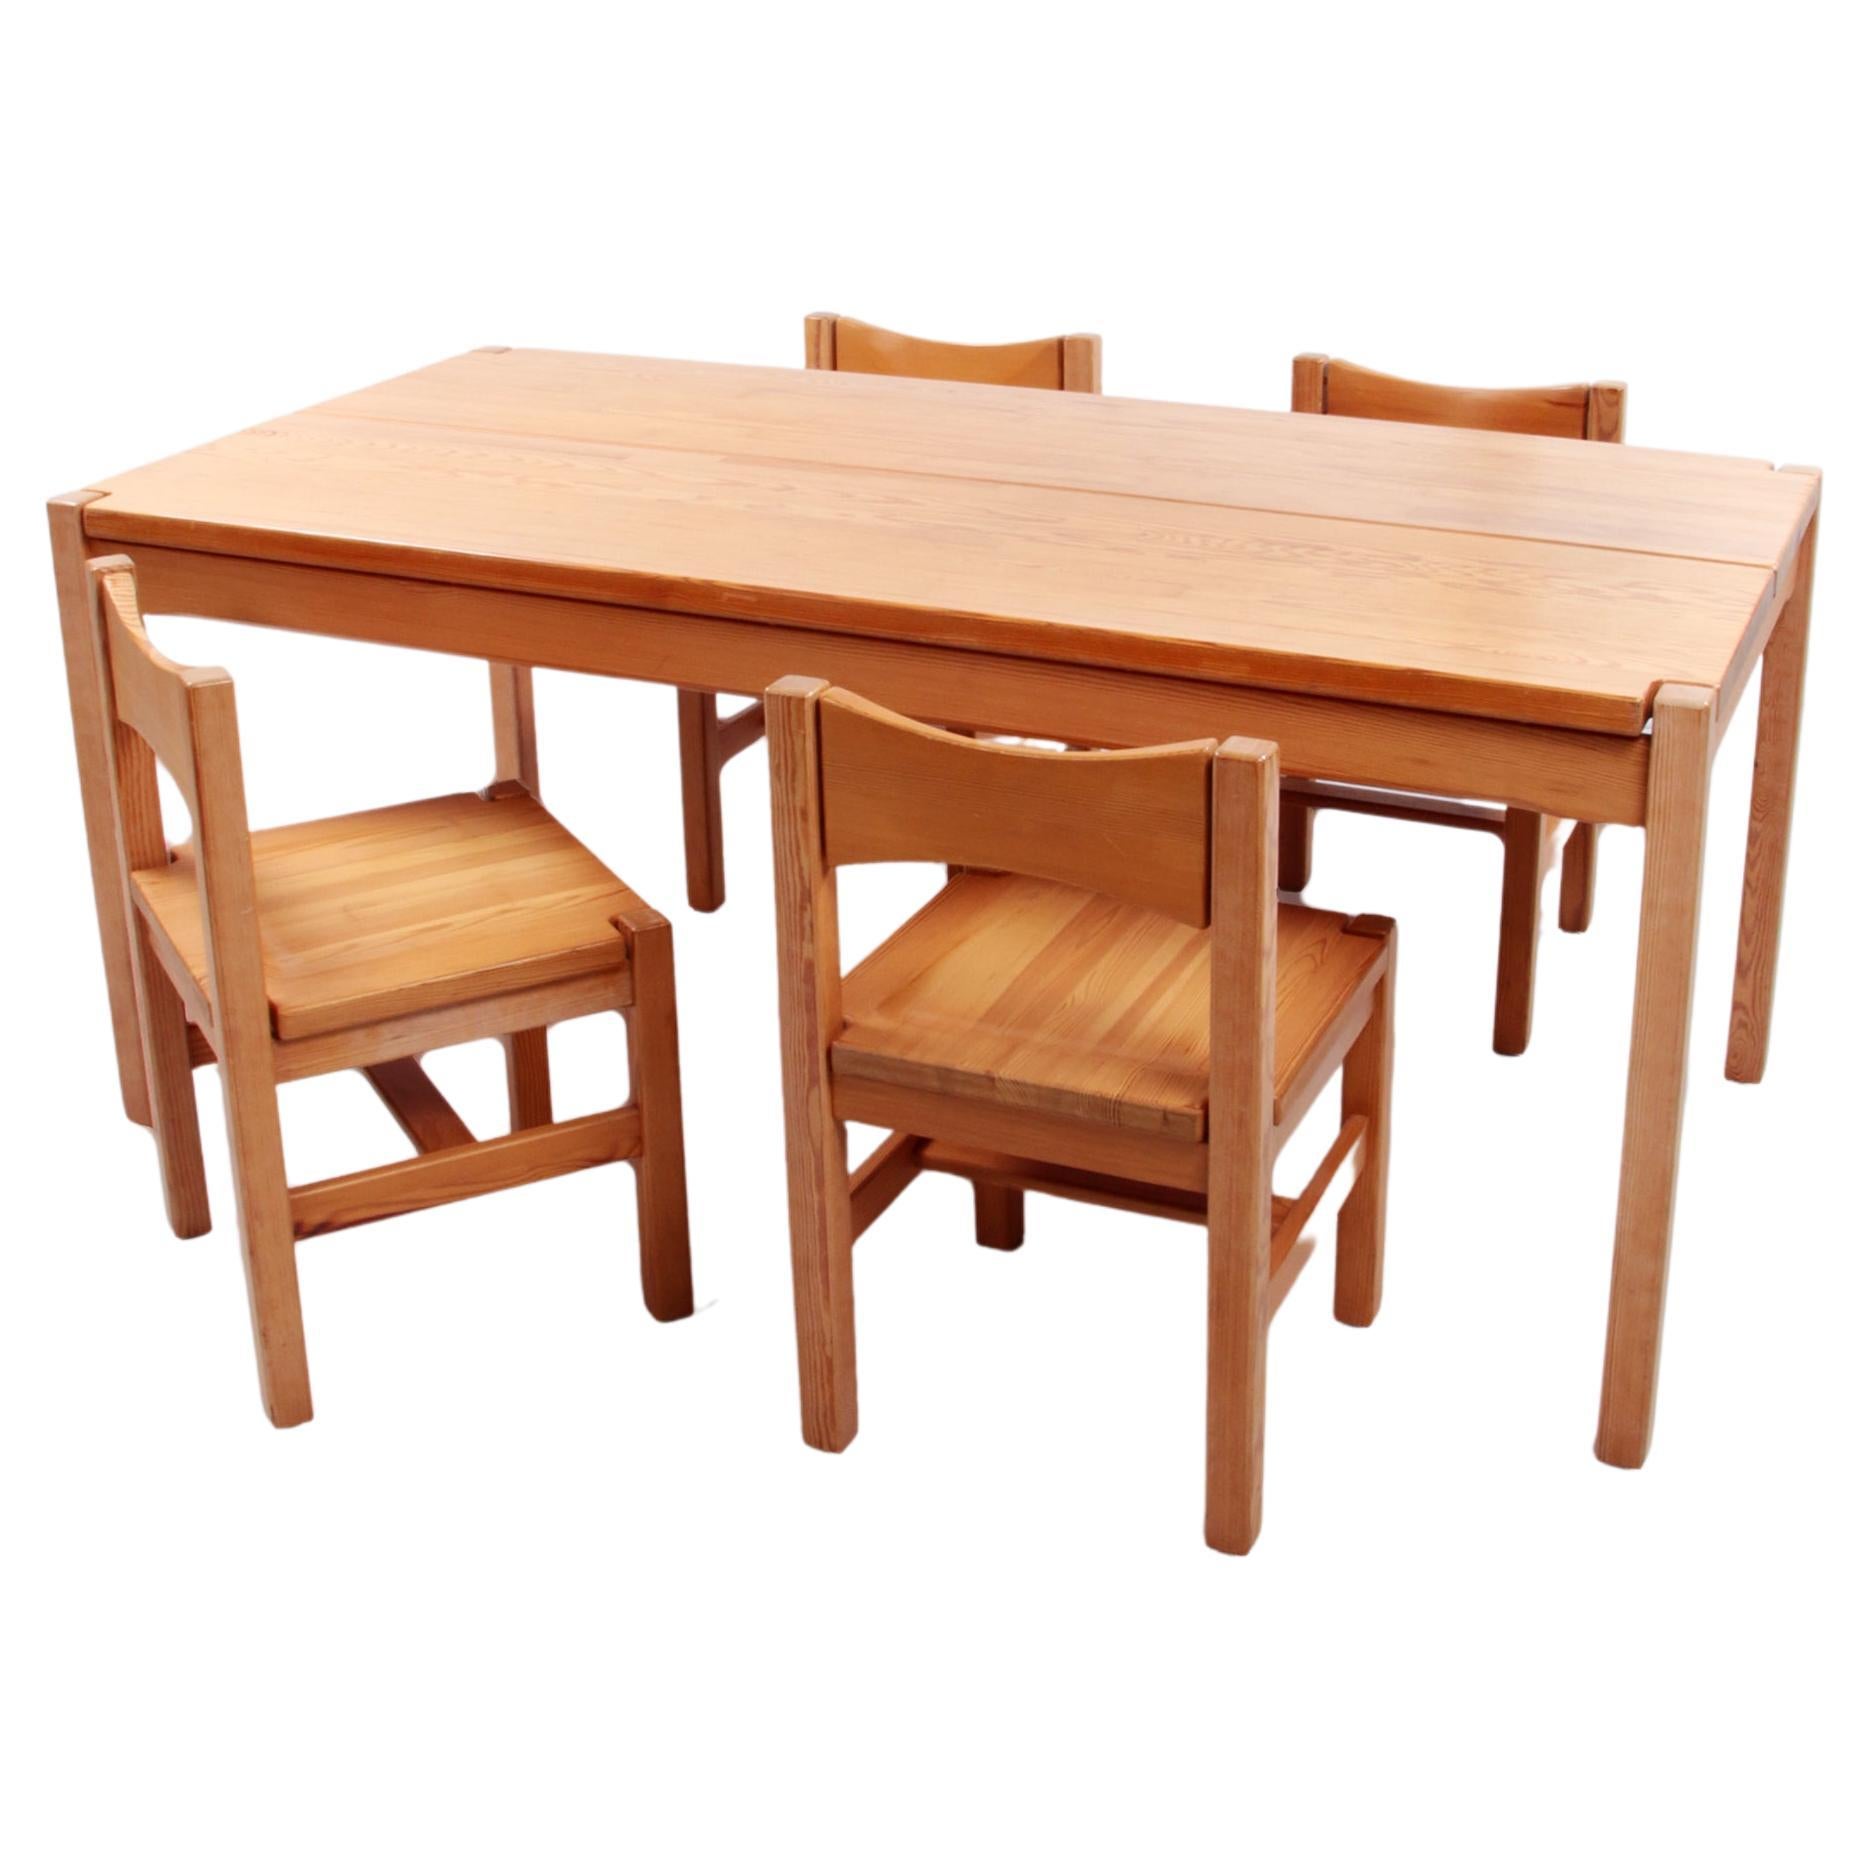 Ilmari Tapiovaara Dining Table with 4 Chairs for Laukaan Pu, 1963 For Sale